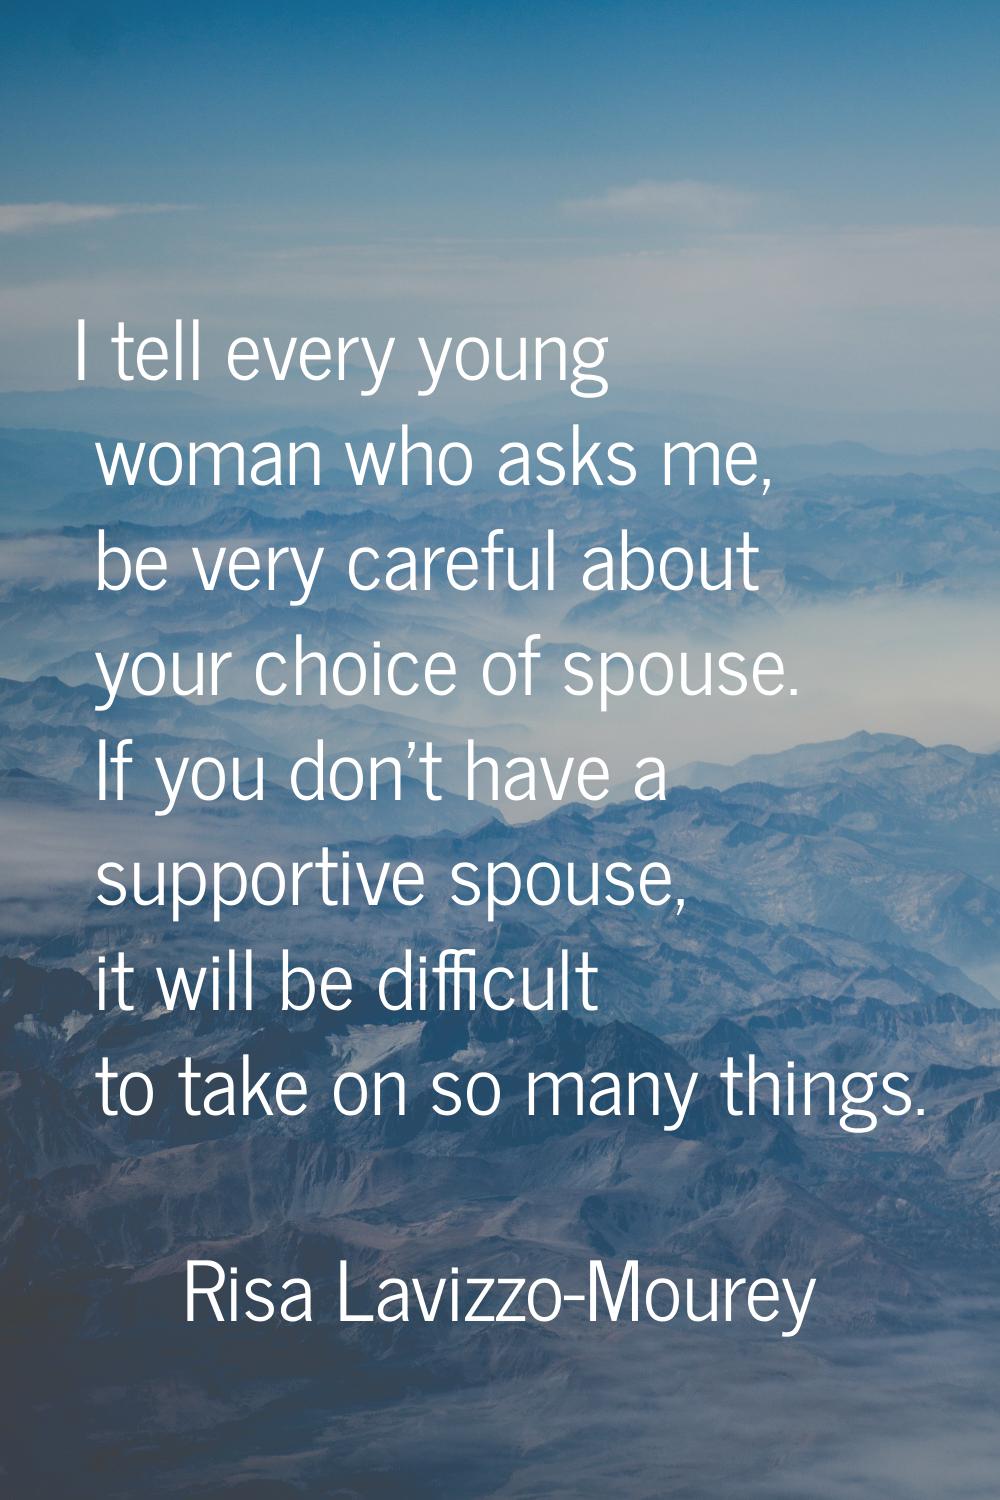 I tell every young woman who asks me, be very careful about your choice of spouse. If you don't hav